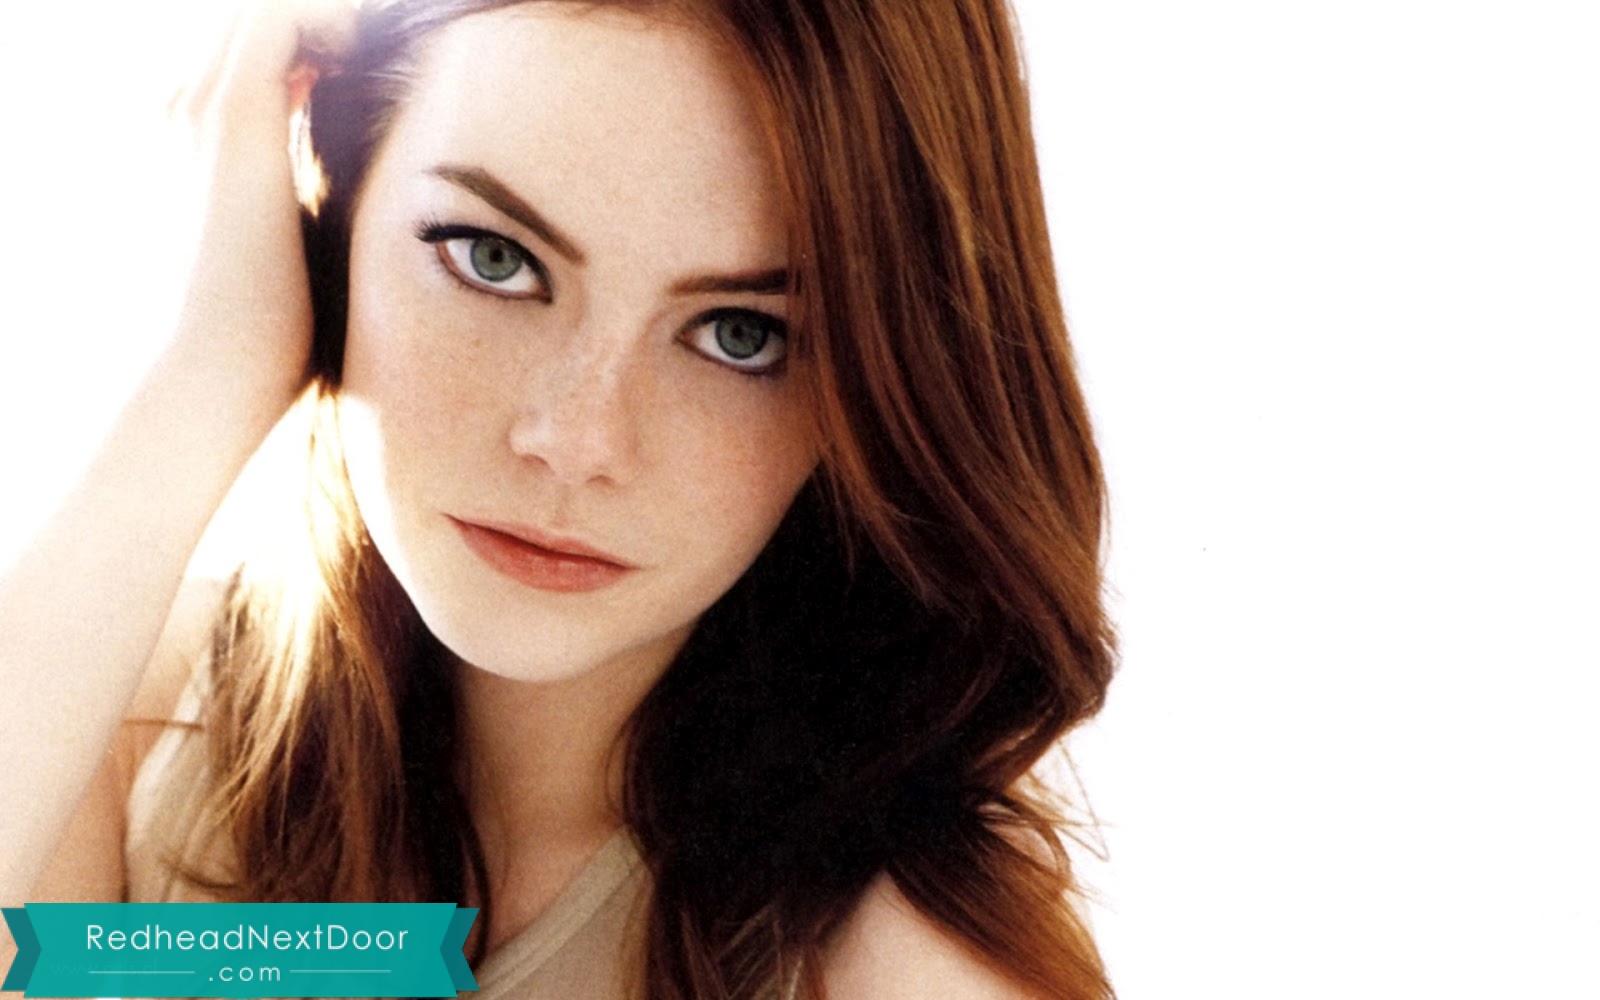 Emma Stone Photos - One of the Hottest Redheads of All Time